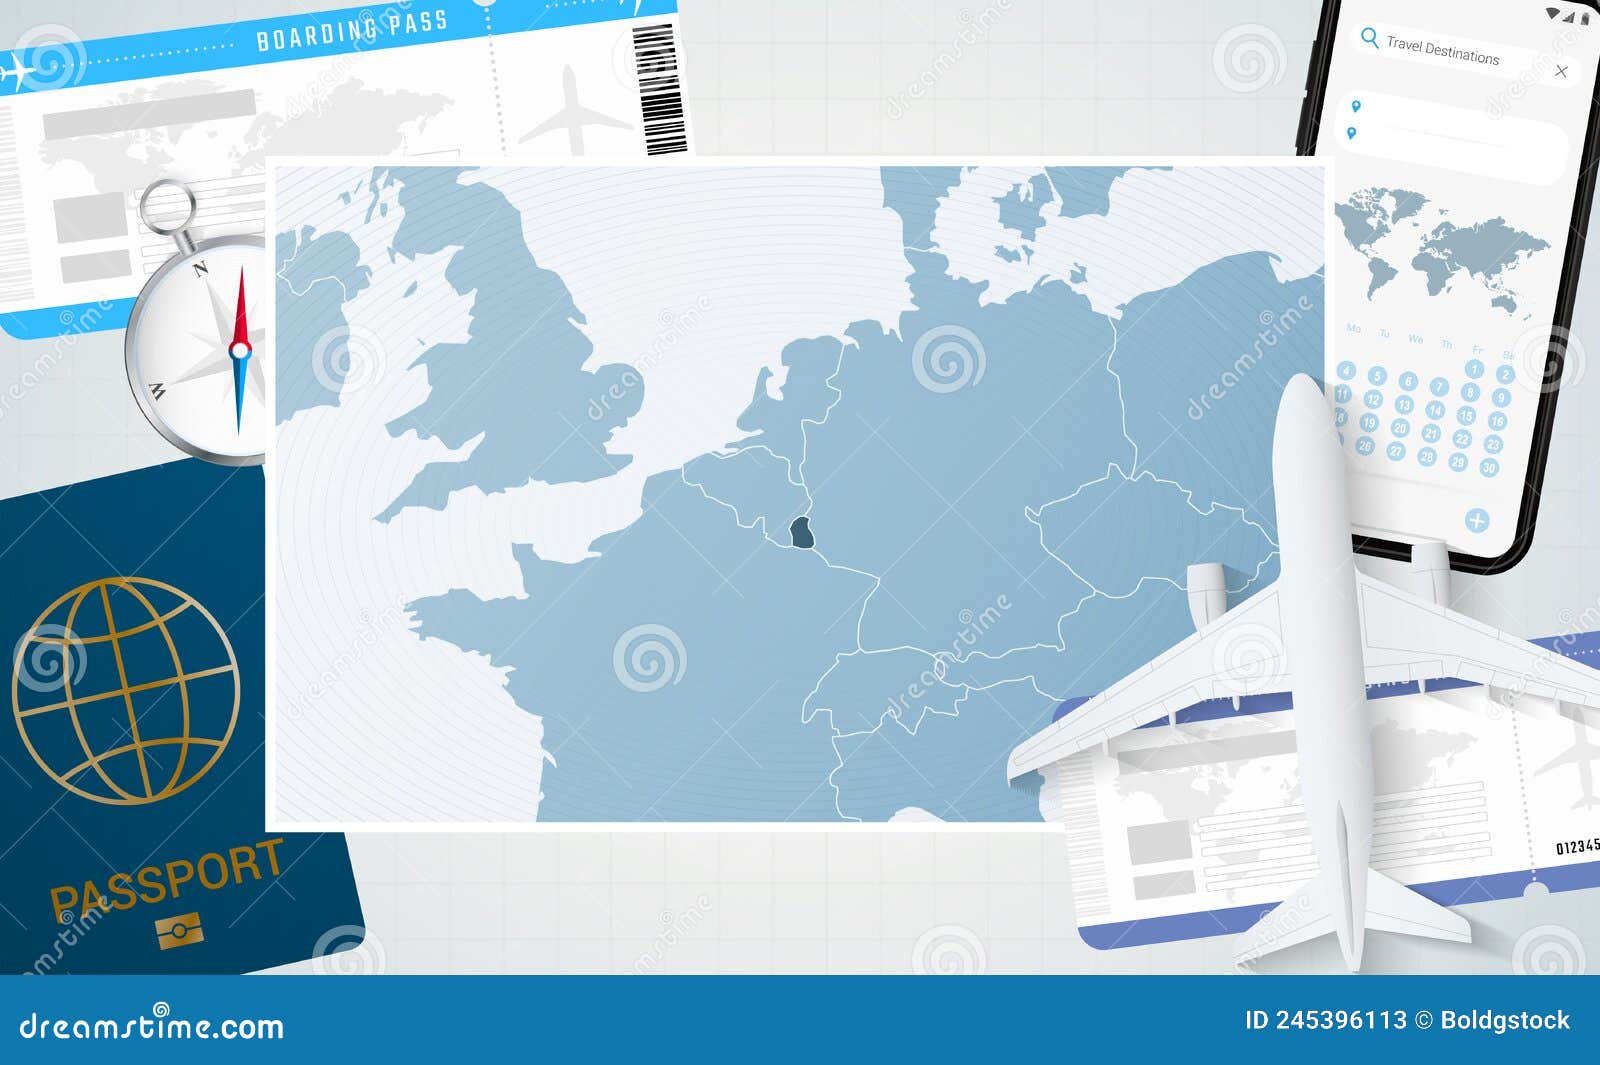 journey planner luxembourg